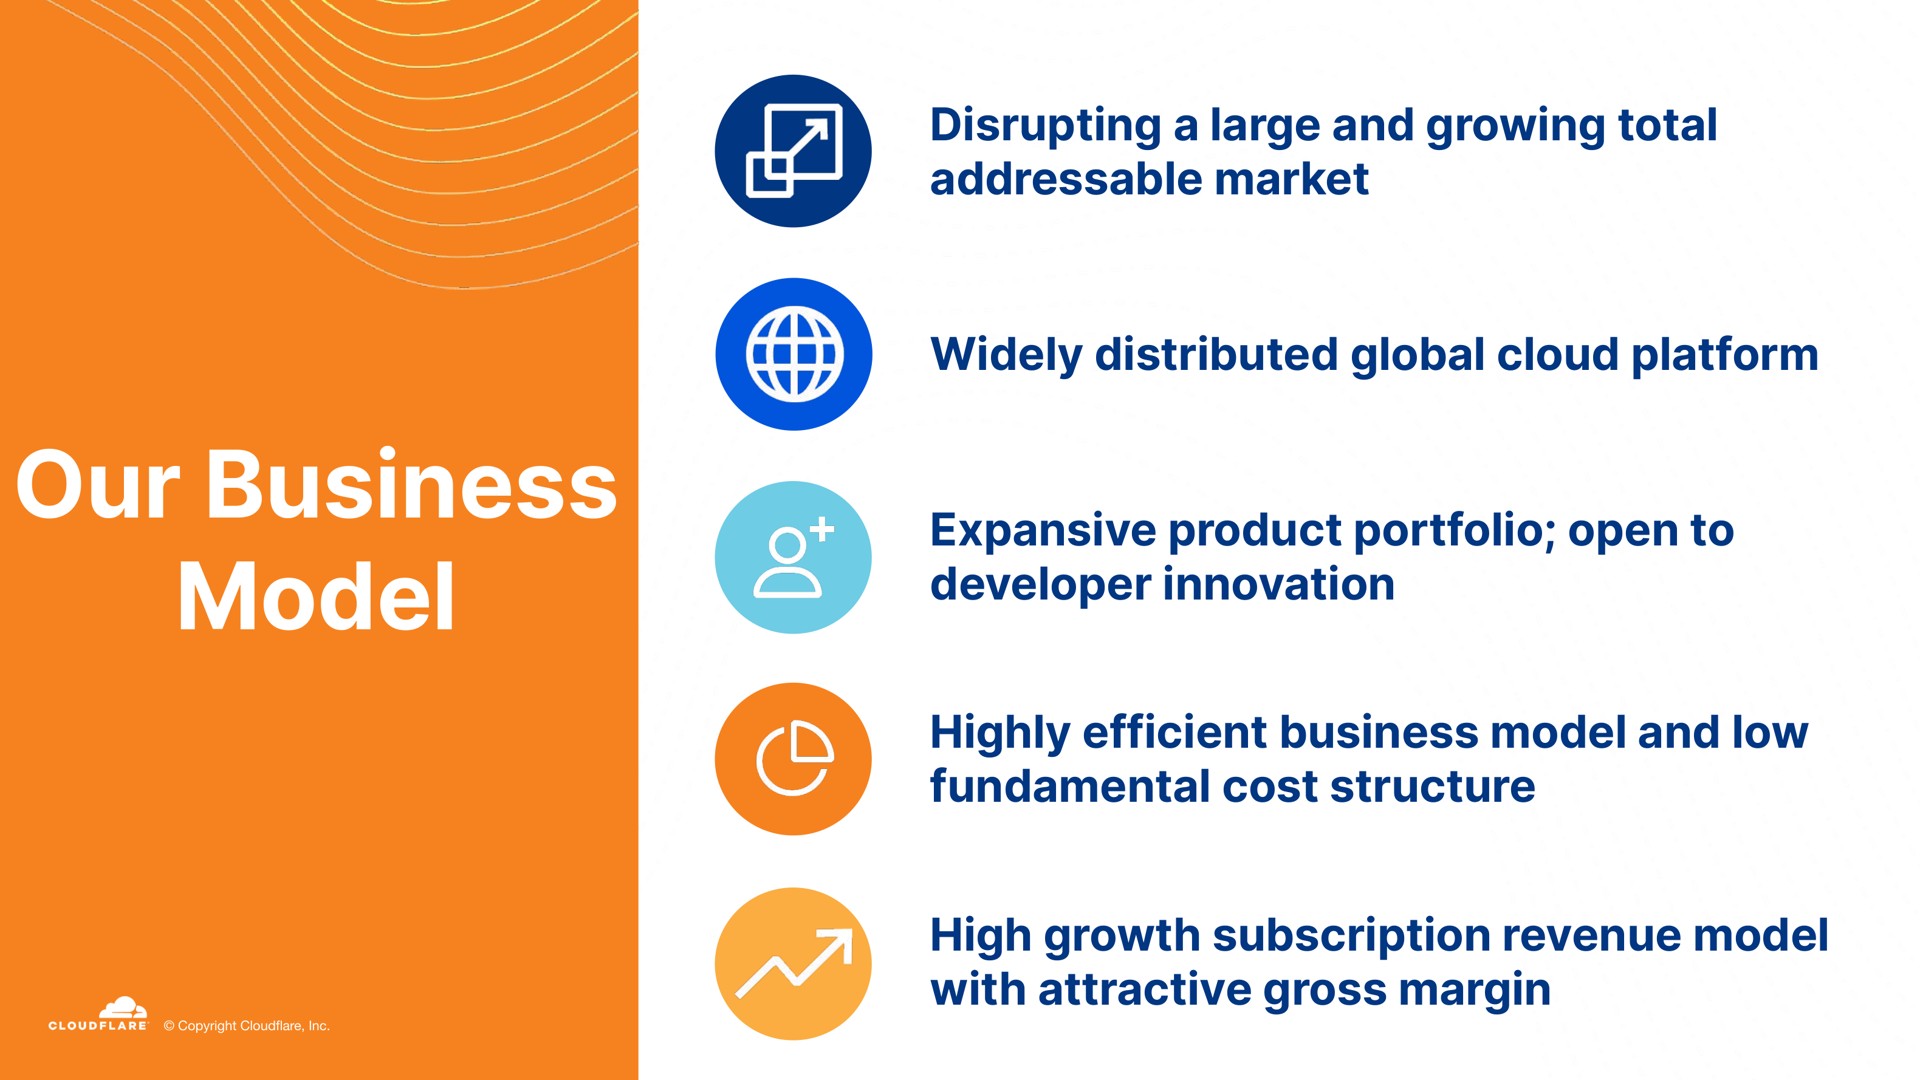 why we win our business model disrupting a large and growing total market widely distributed global cloud platform expansive product portfolio open to developer innovation highly efficient and low fundamental cost structure high growth subscription revenue with attractive gross margin | Cloudflare